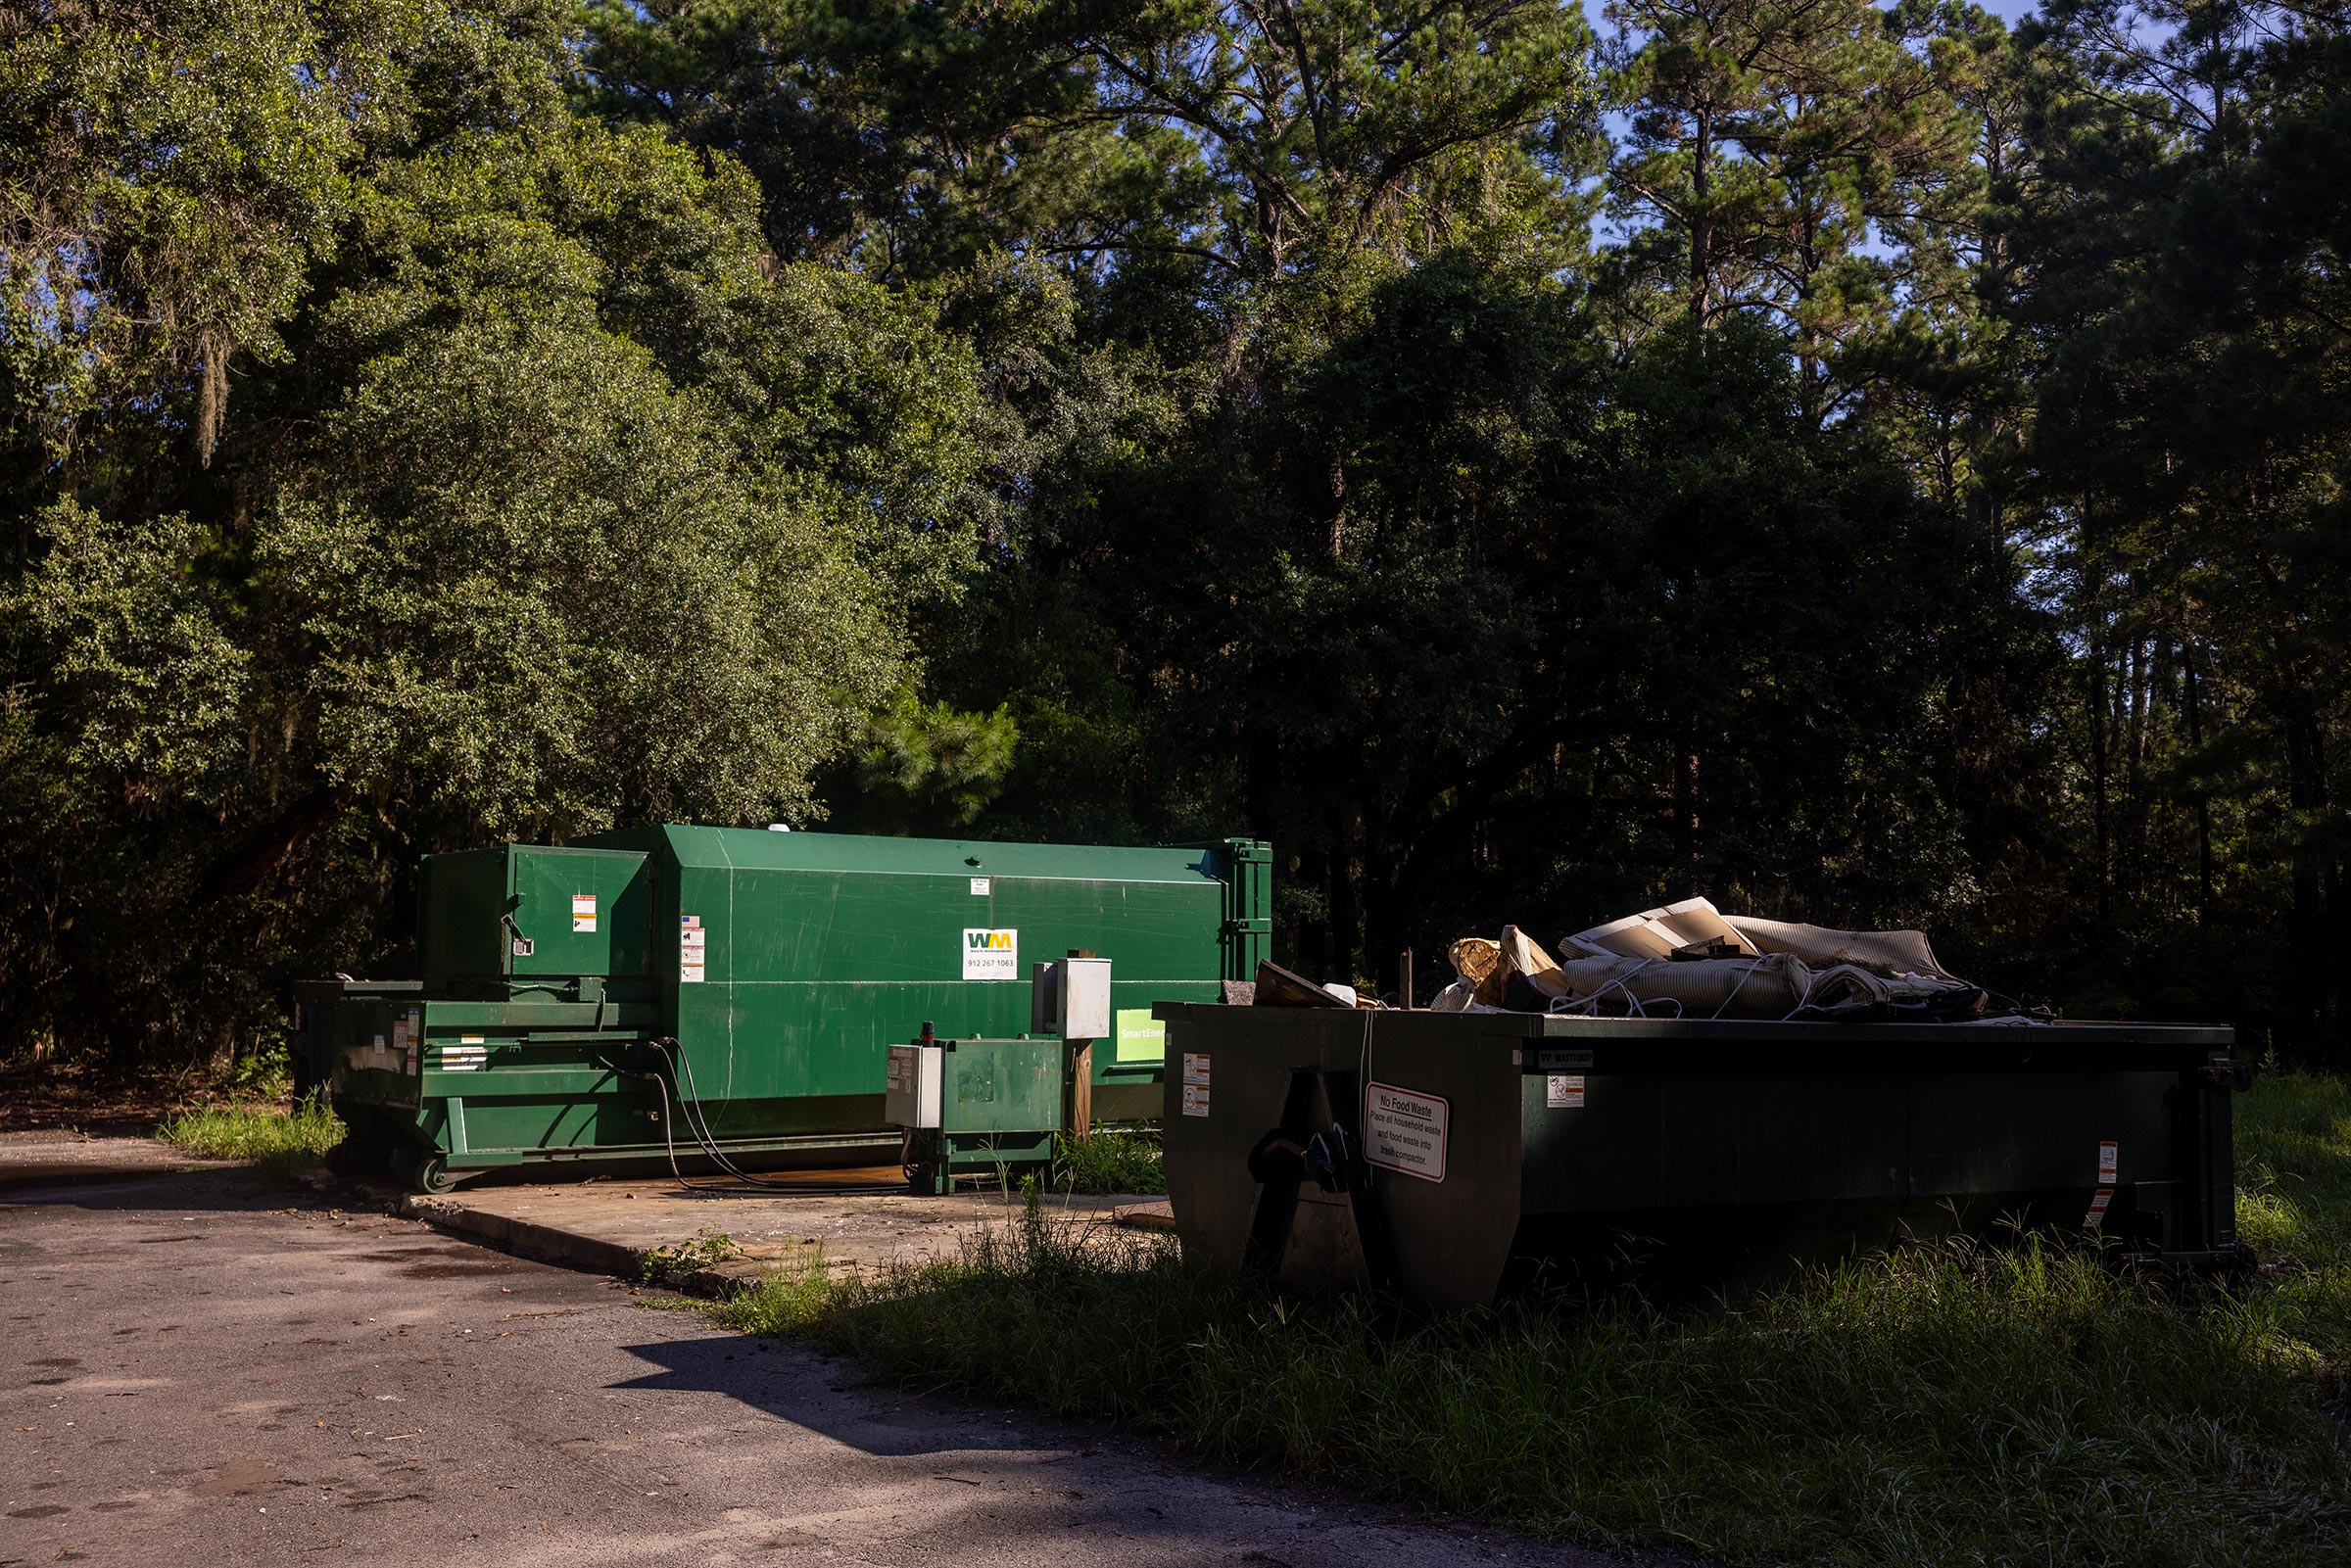 The island's trash dump site where residents and visitors must cart their own trash and place certain items such as food waste into a green trash compactor.